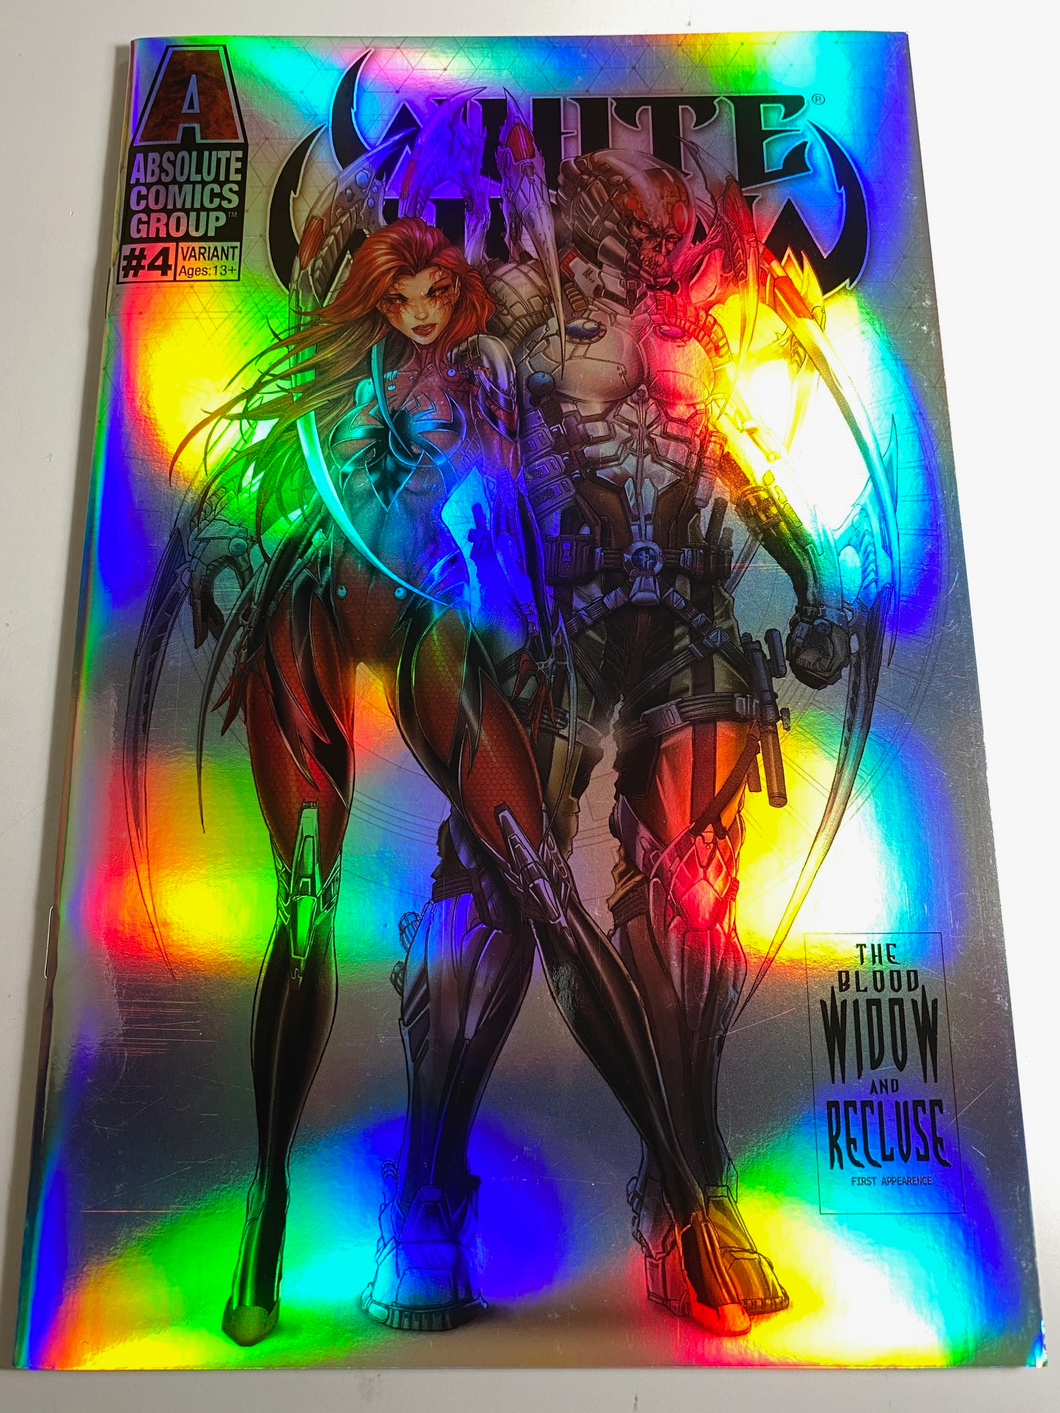 WHITE WIDOW #4 BLOOD WIDOW & RECLUSE FOIL CHROME EXCLUSIVE